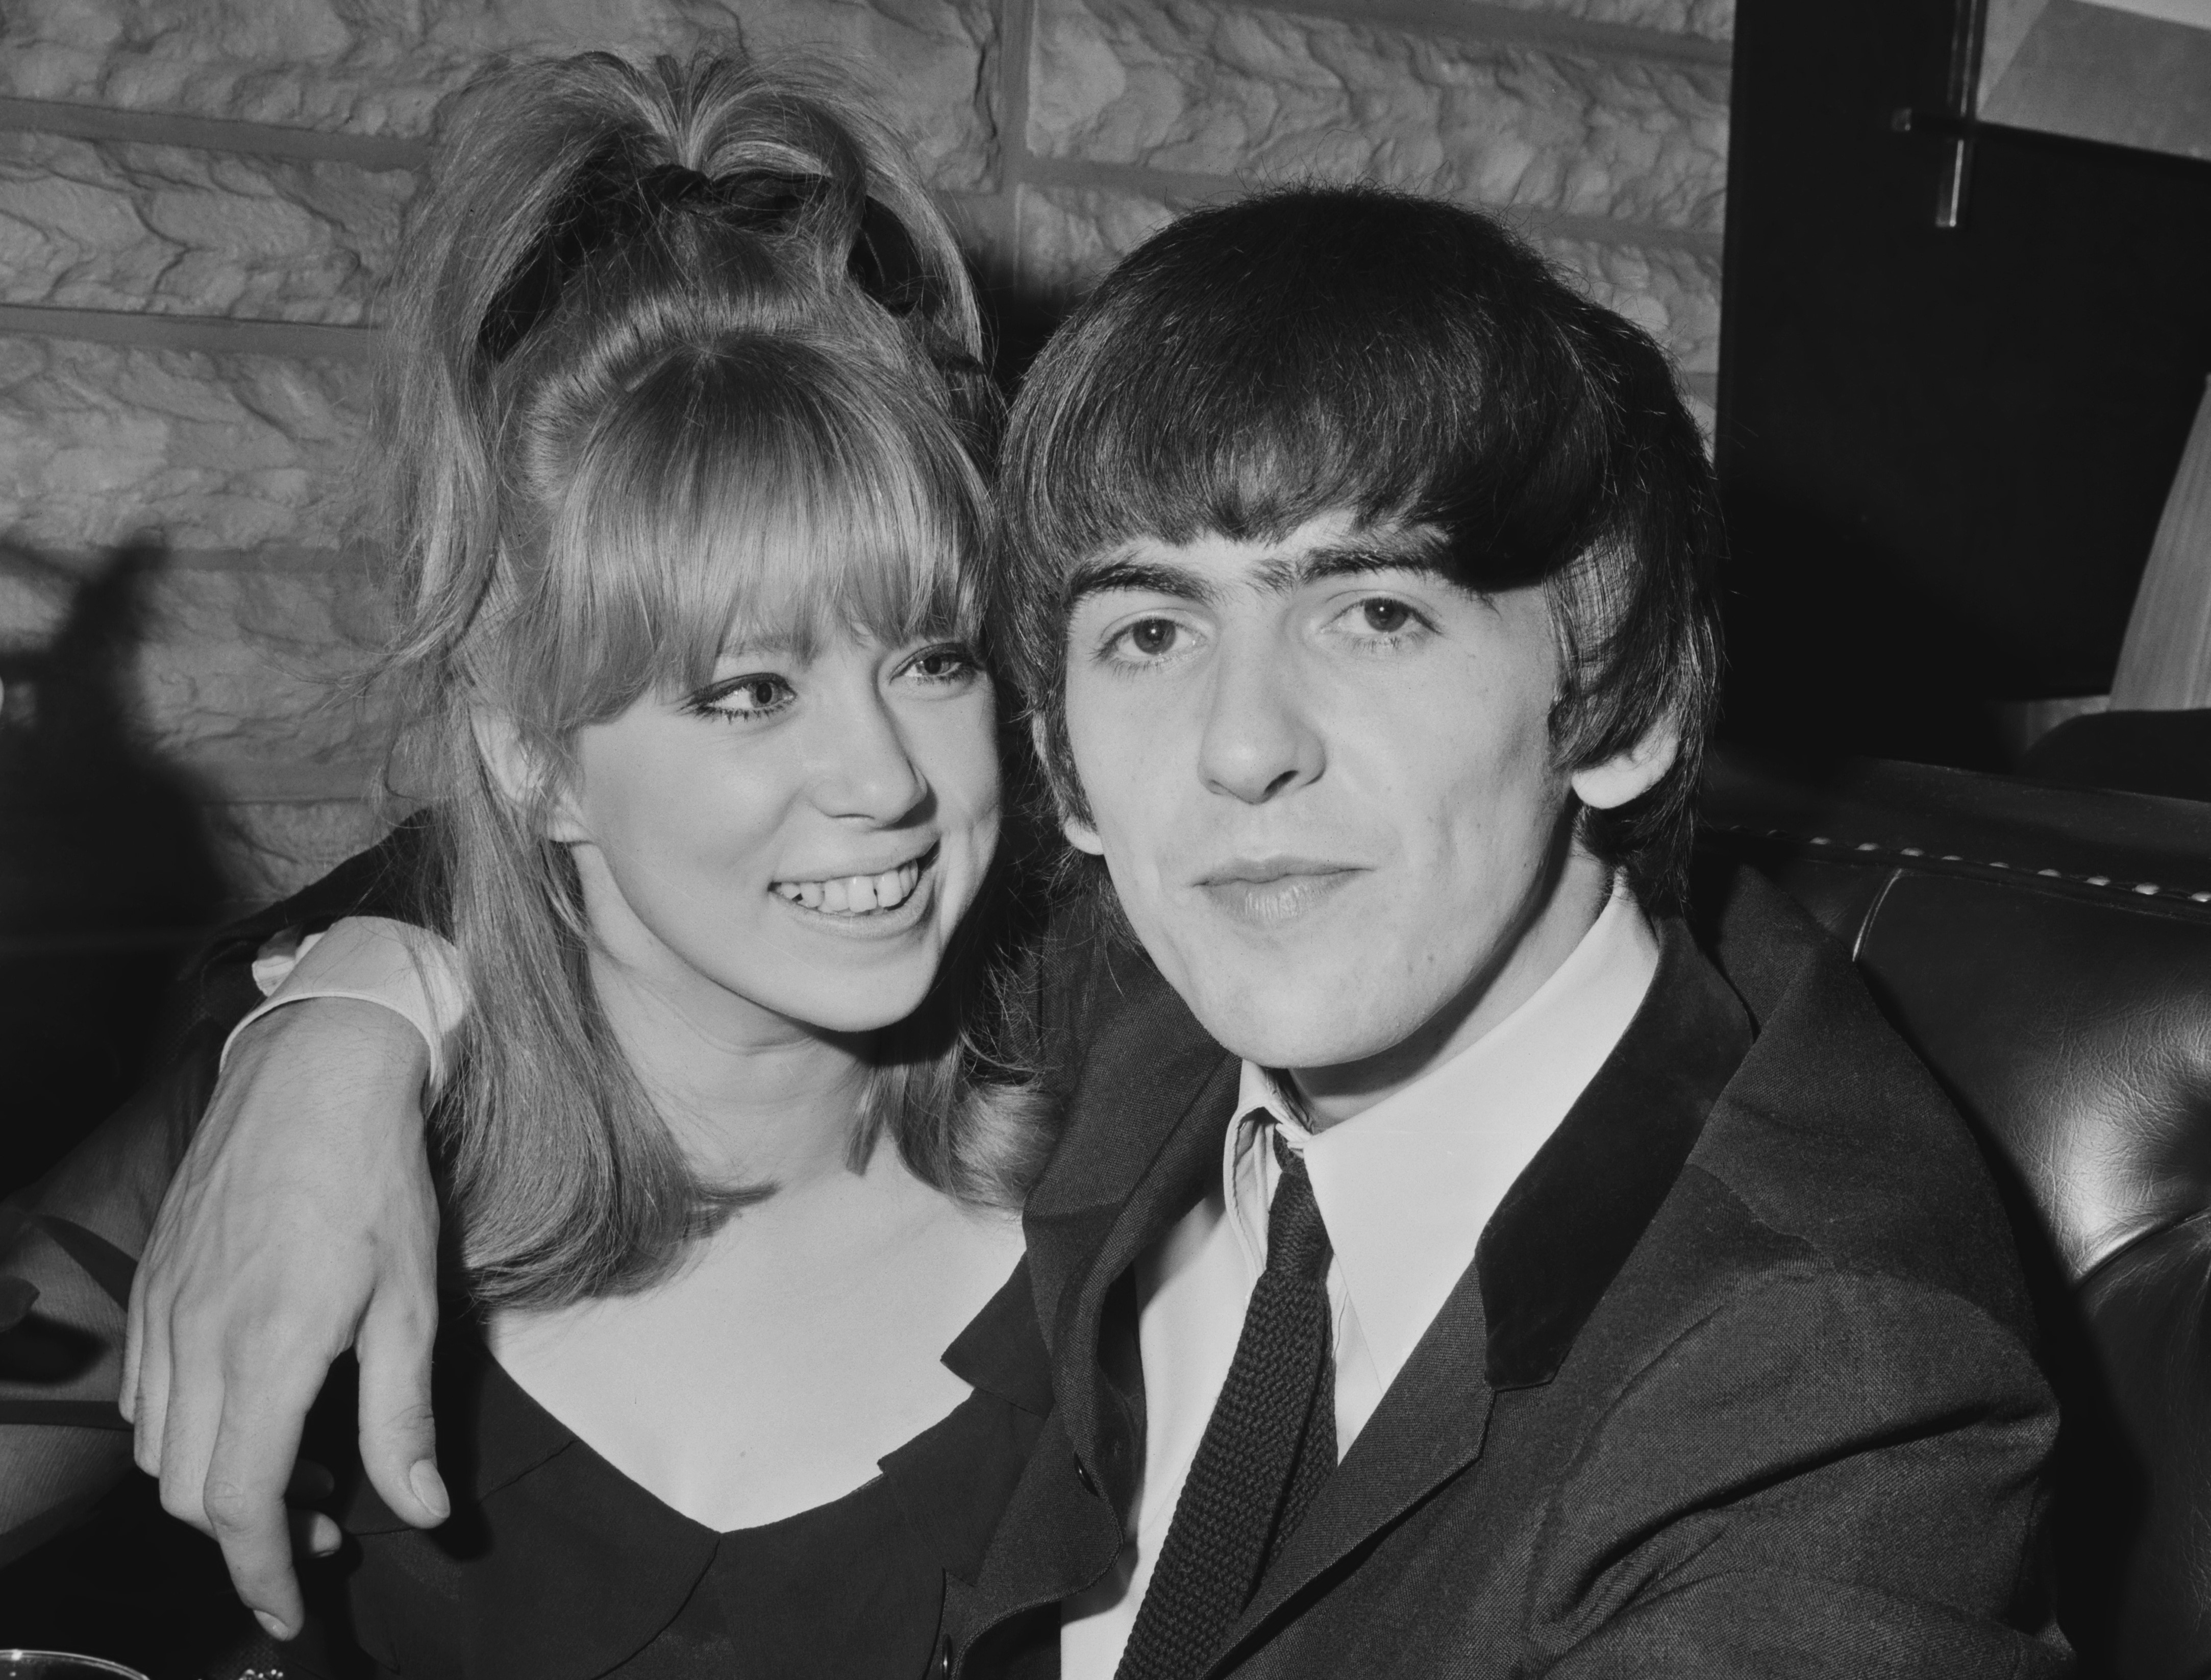 A black and white picture of George Harrison sitting with his arm around Pattie Boyd's shoulders.